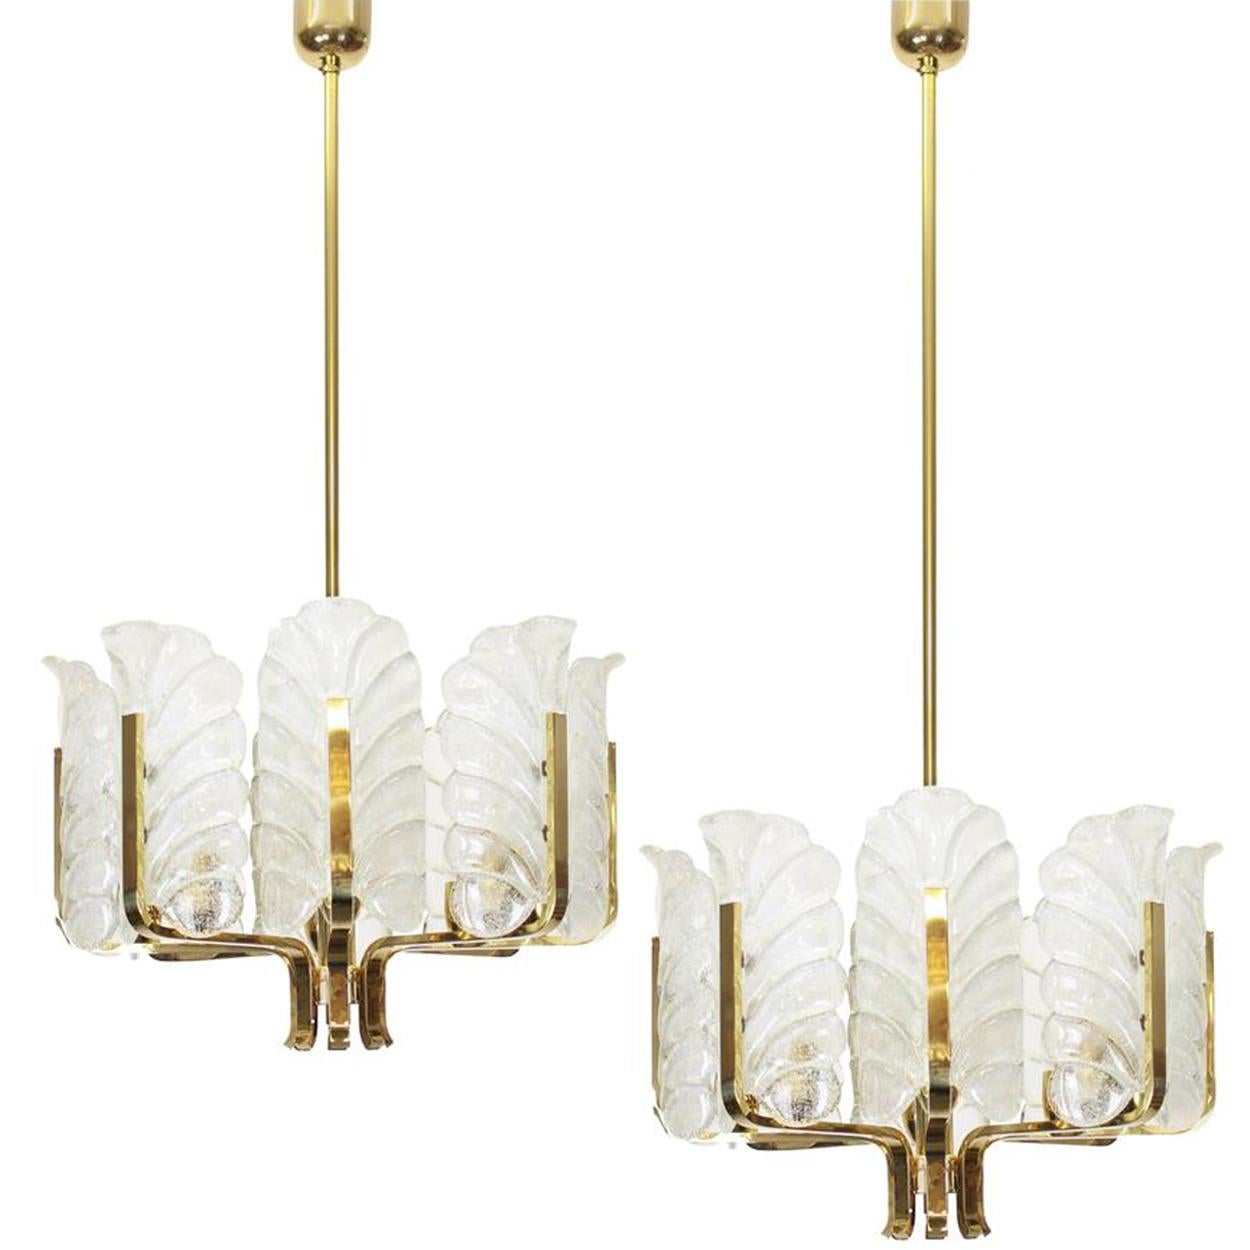 One of the Six Large Fagerlund Glass Leaves Brass Chandelier by Orrefors, 1960s For Sale 1